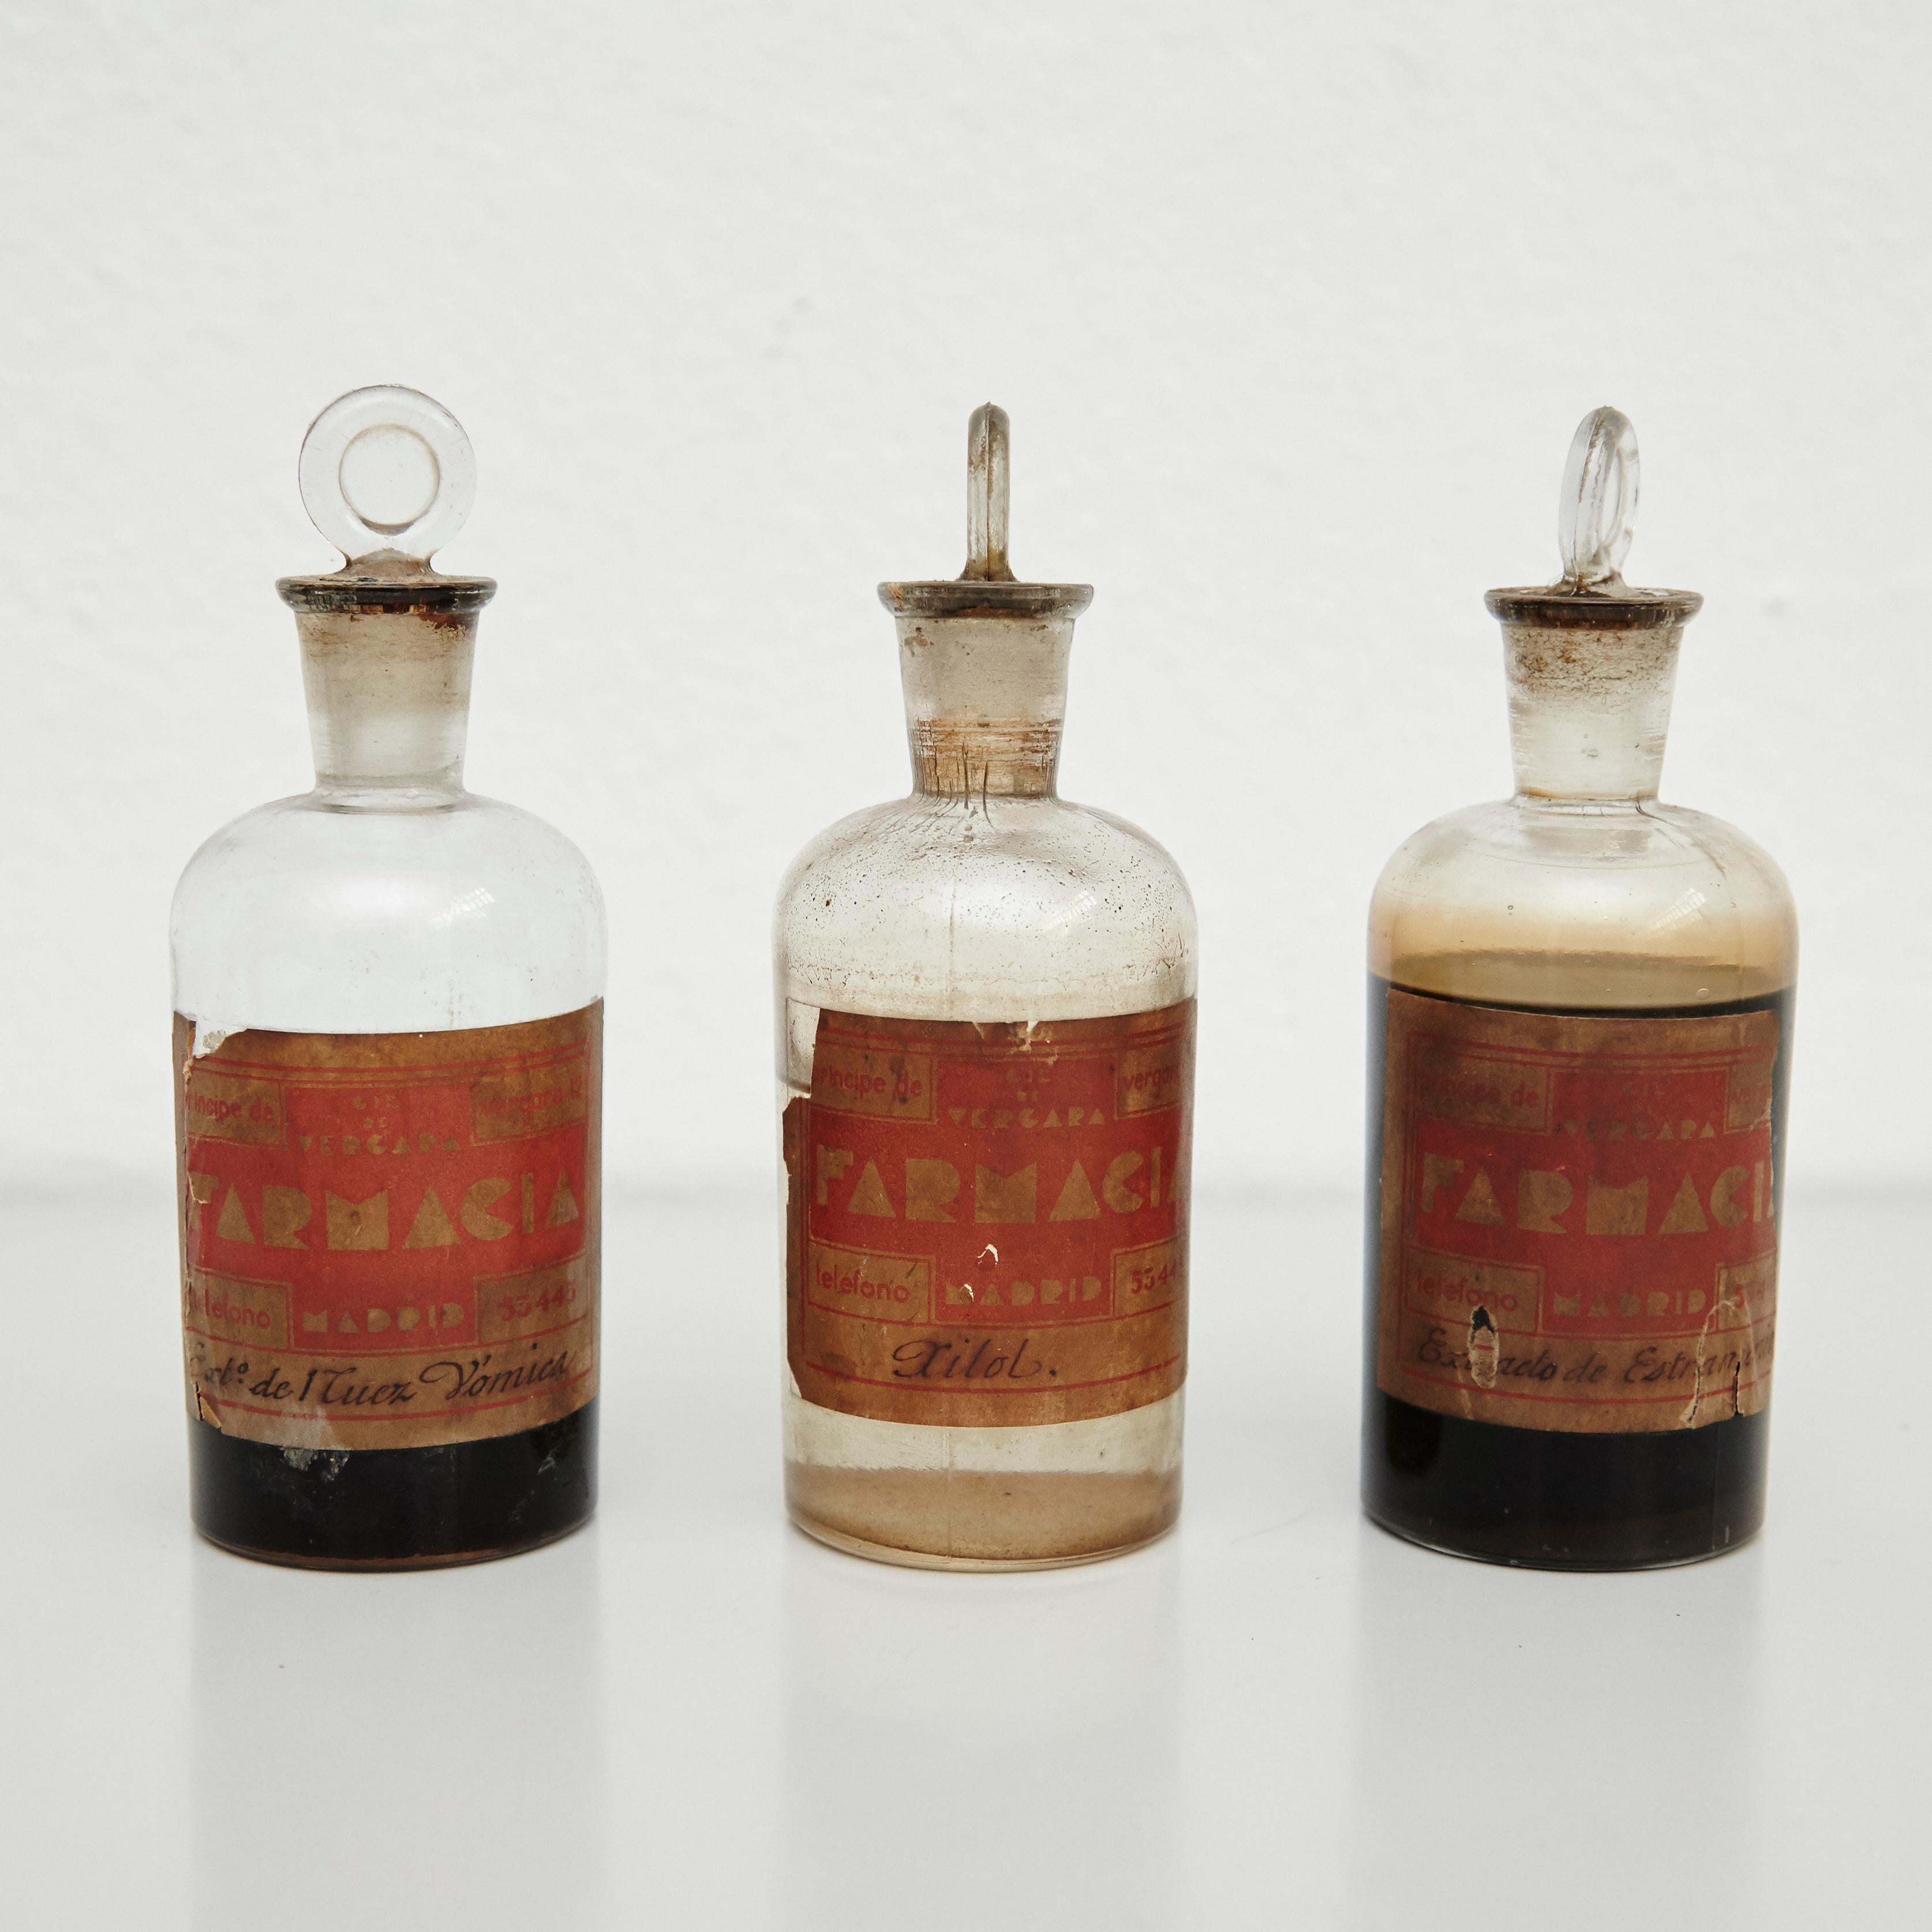 Early 20th century set of three antique apothecary glass bottles.
By unknown manufacturer, Spain.

In original condition, with minor wear consistent with age and use, preserving a beautiful patina.

Materials:
Glass

Dimensions (each